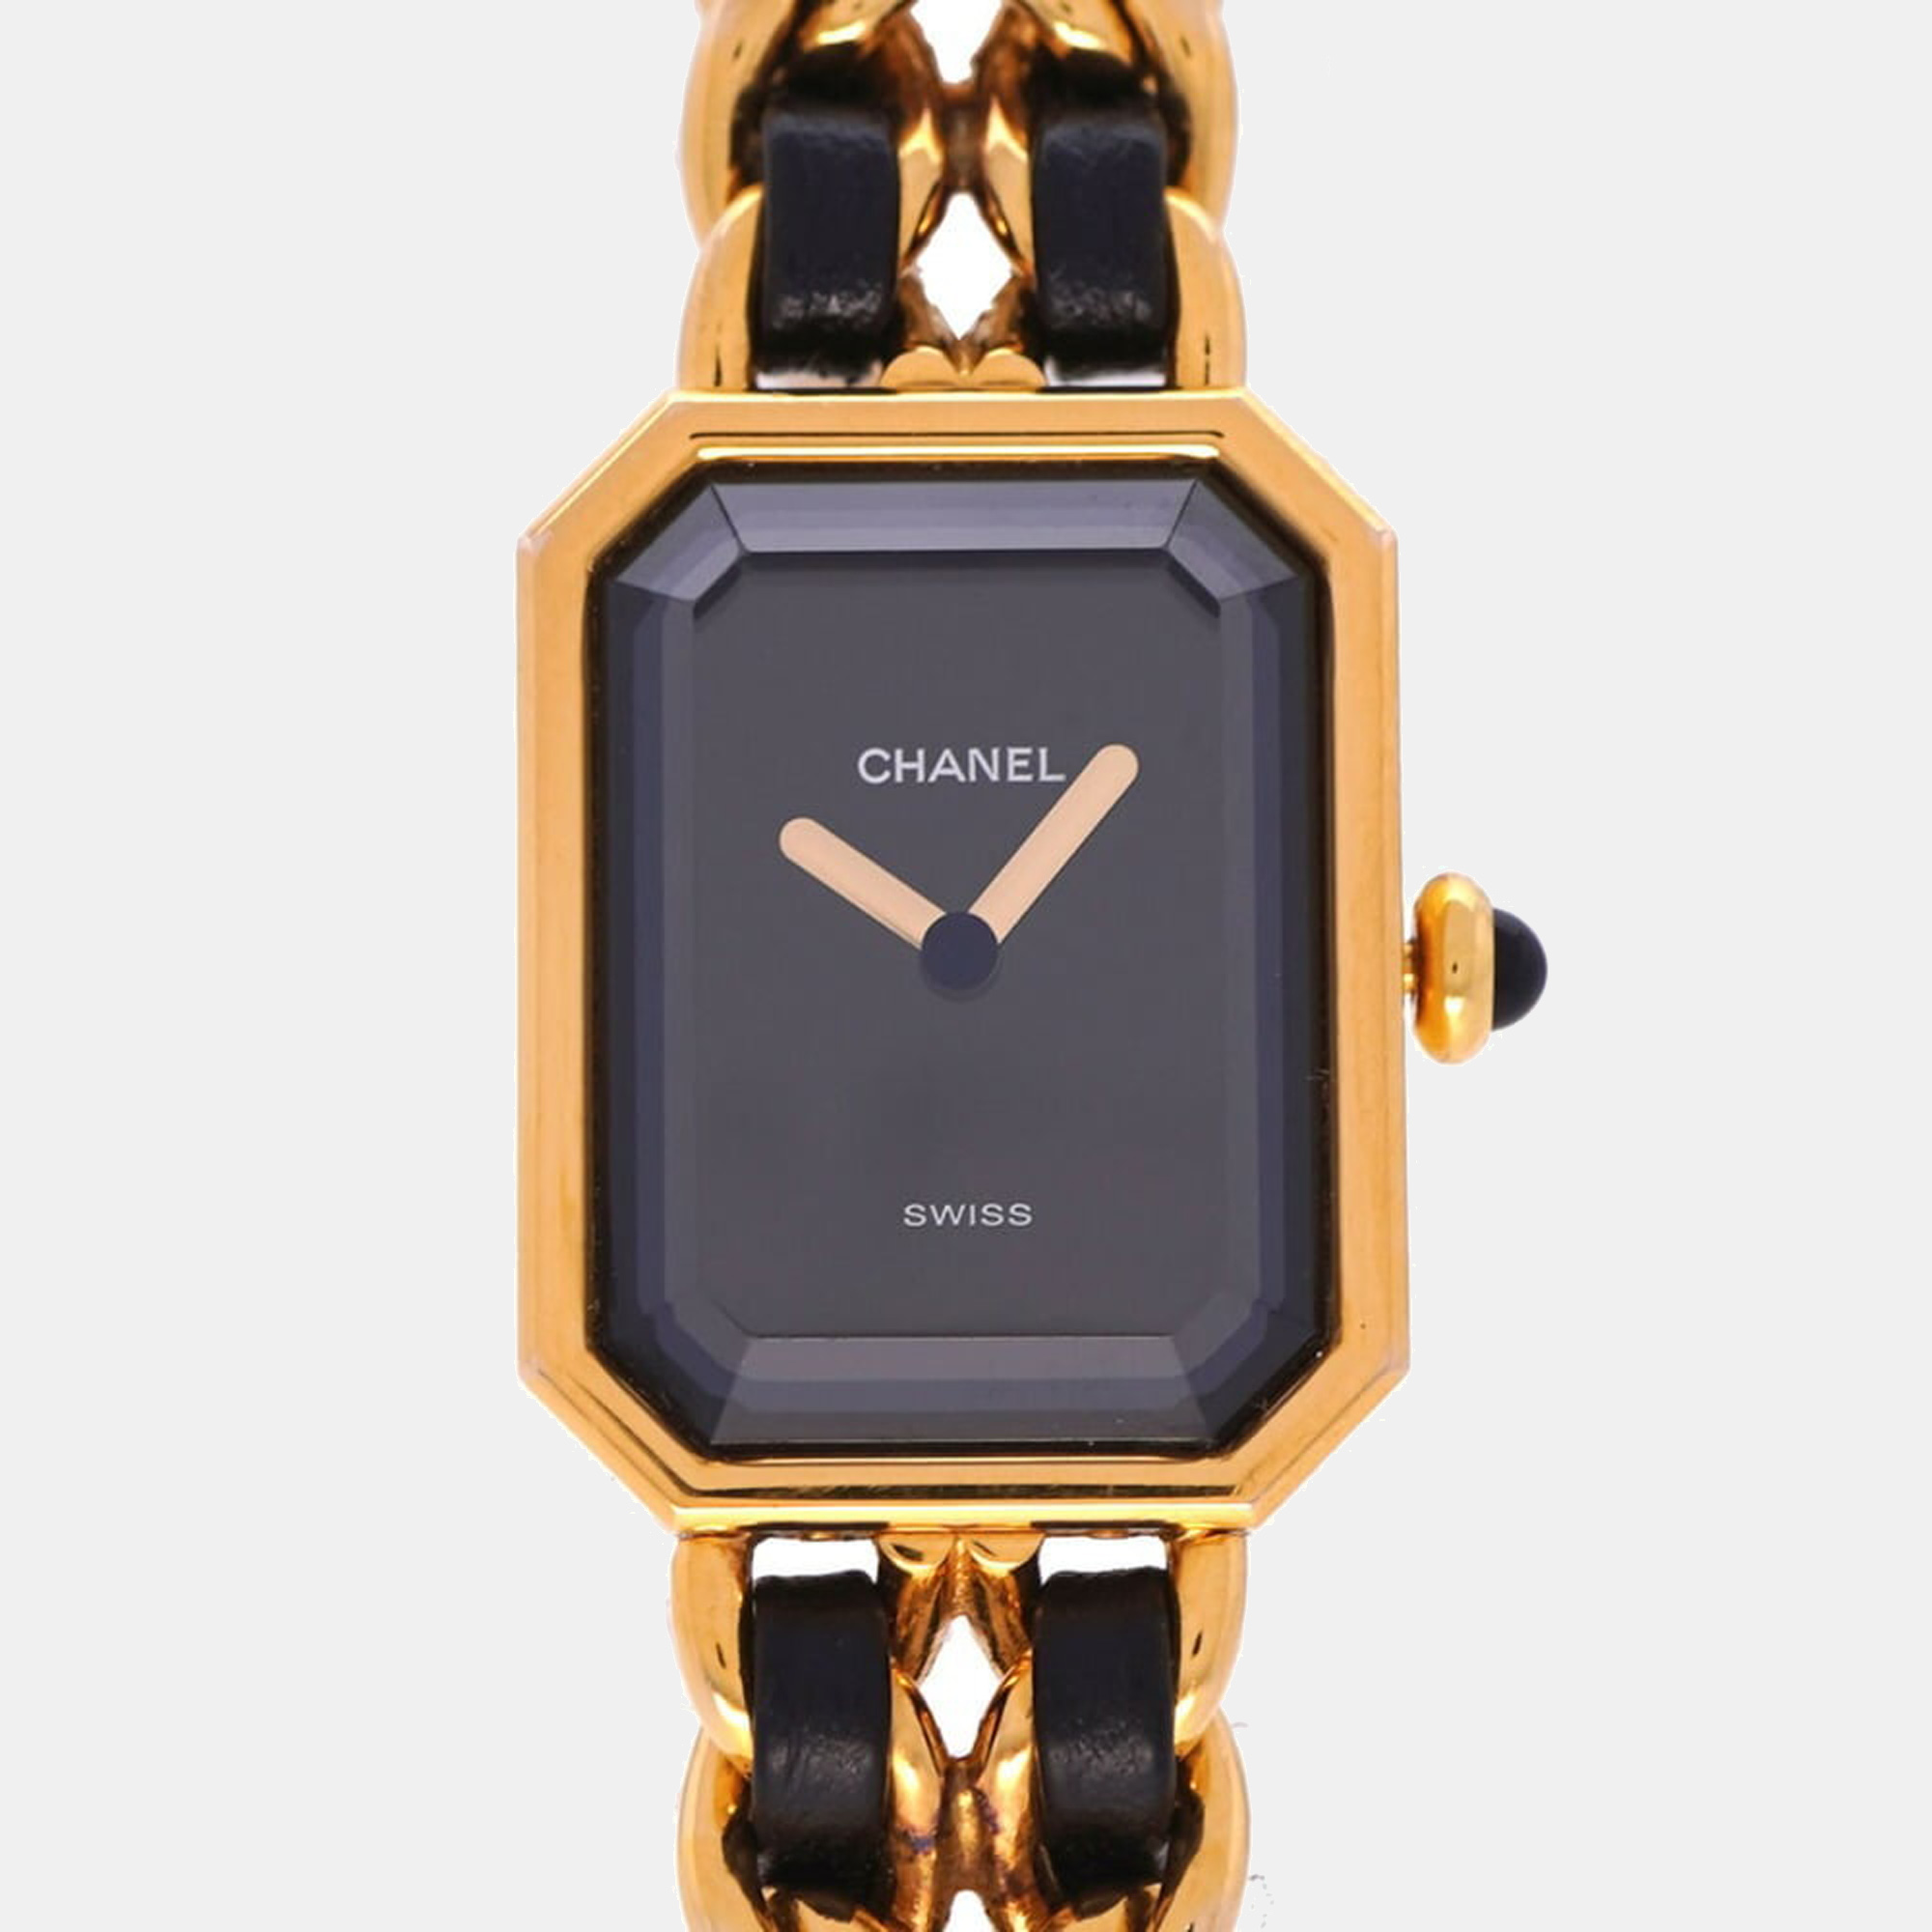 CHANEL Vintage 18K Yellow Gold Premiere Watch. Available in Size